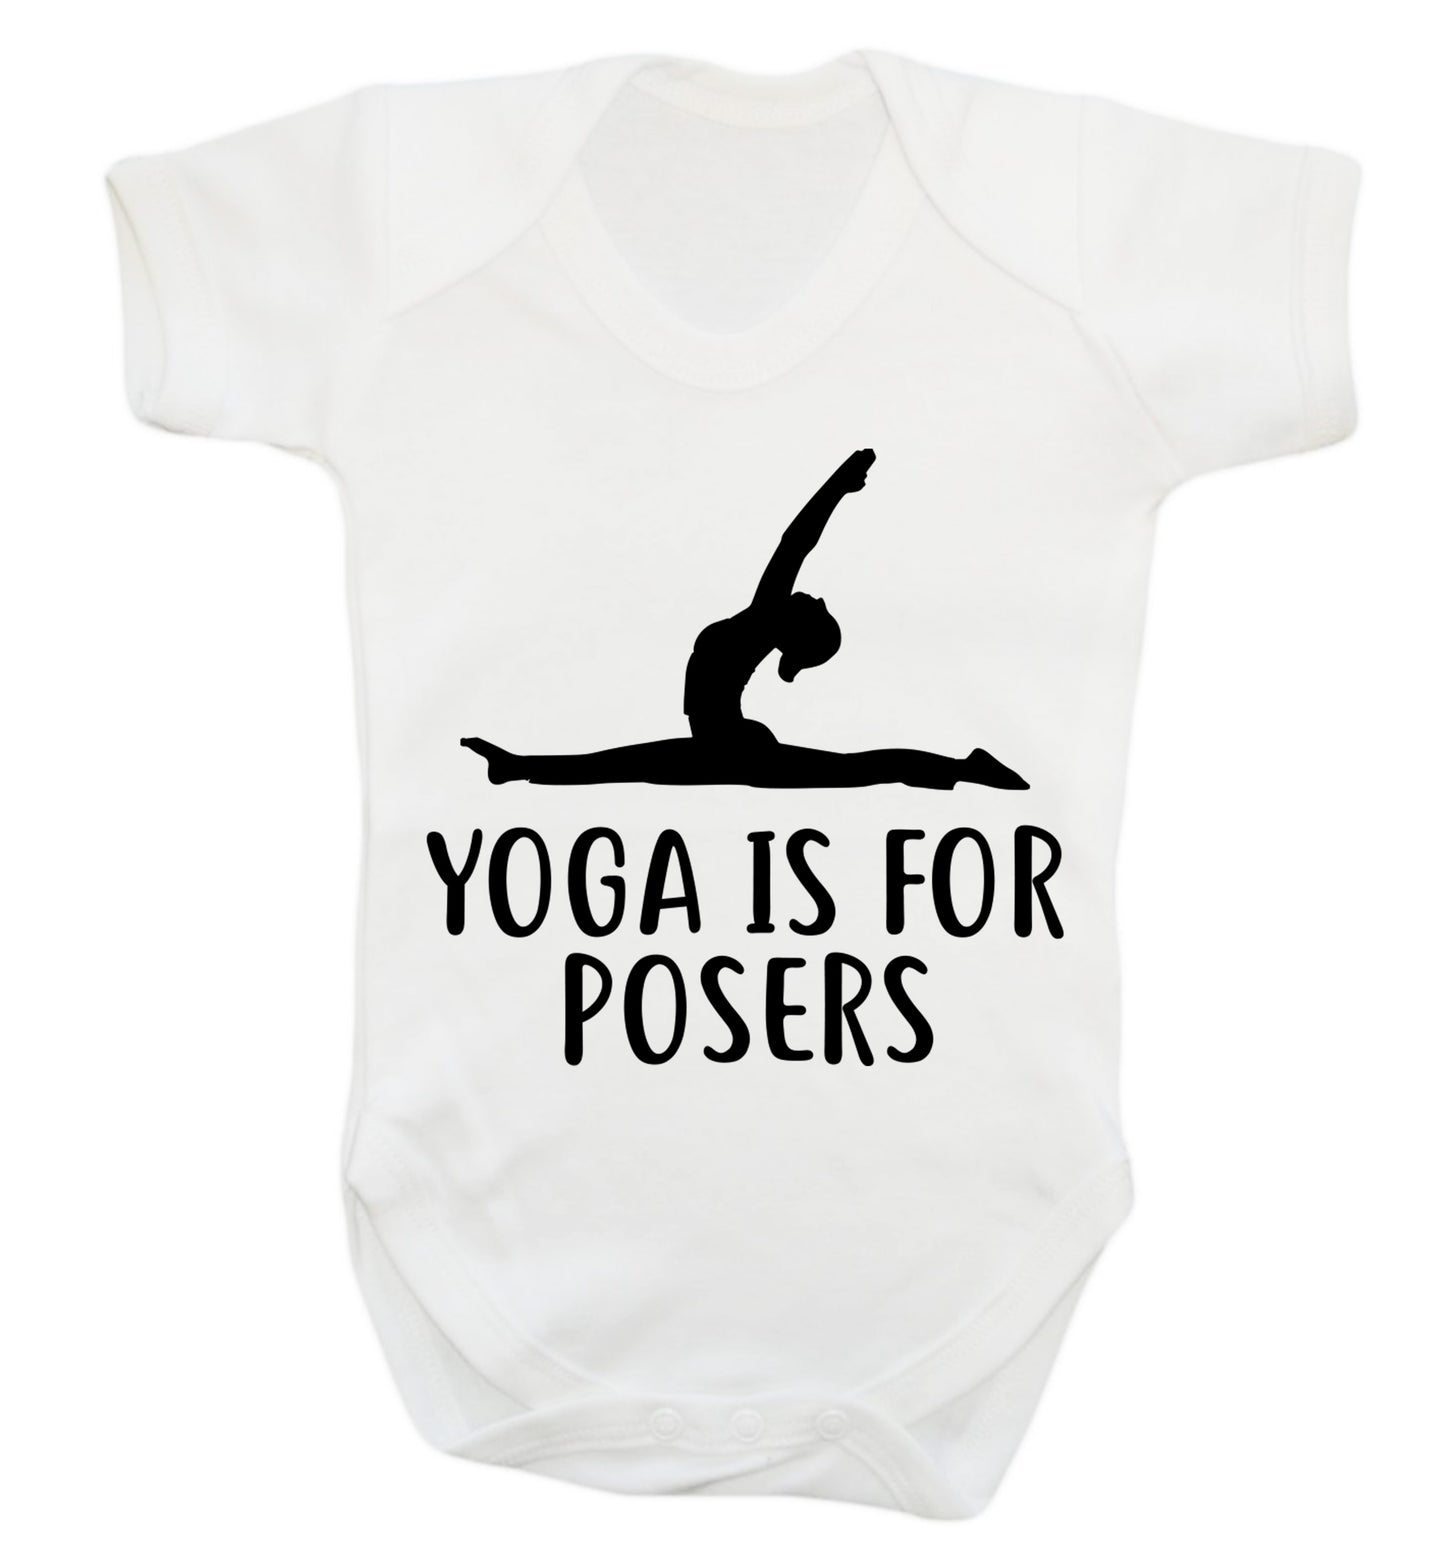 Yoga is for posers Baby Vest white 18-24 months